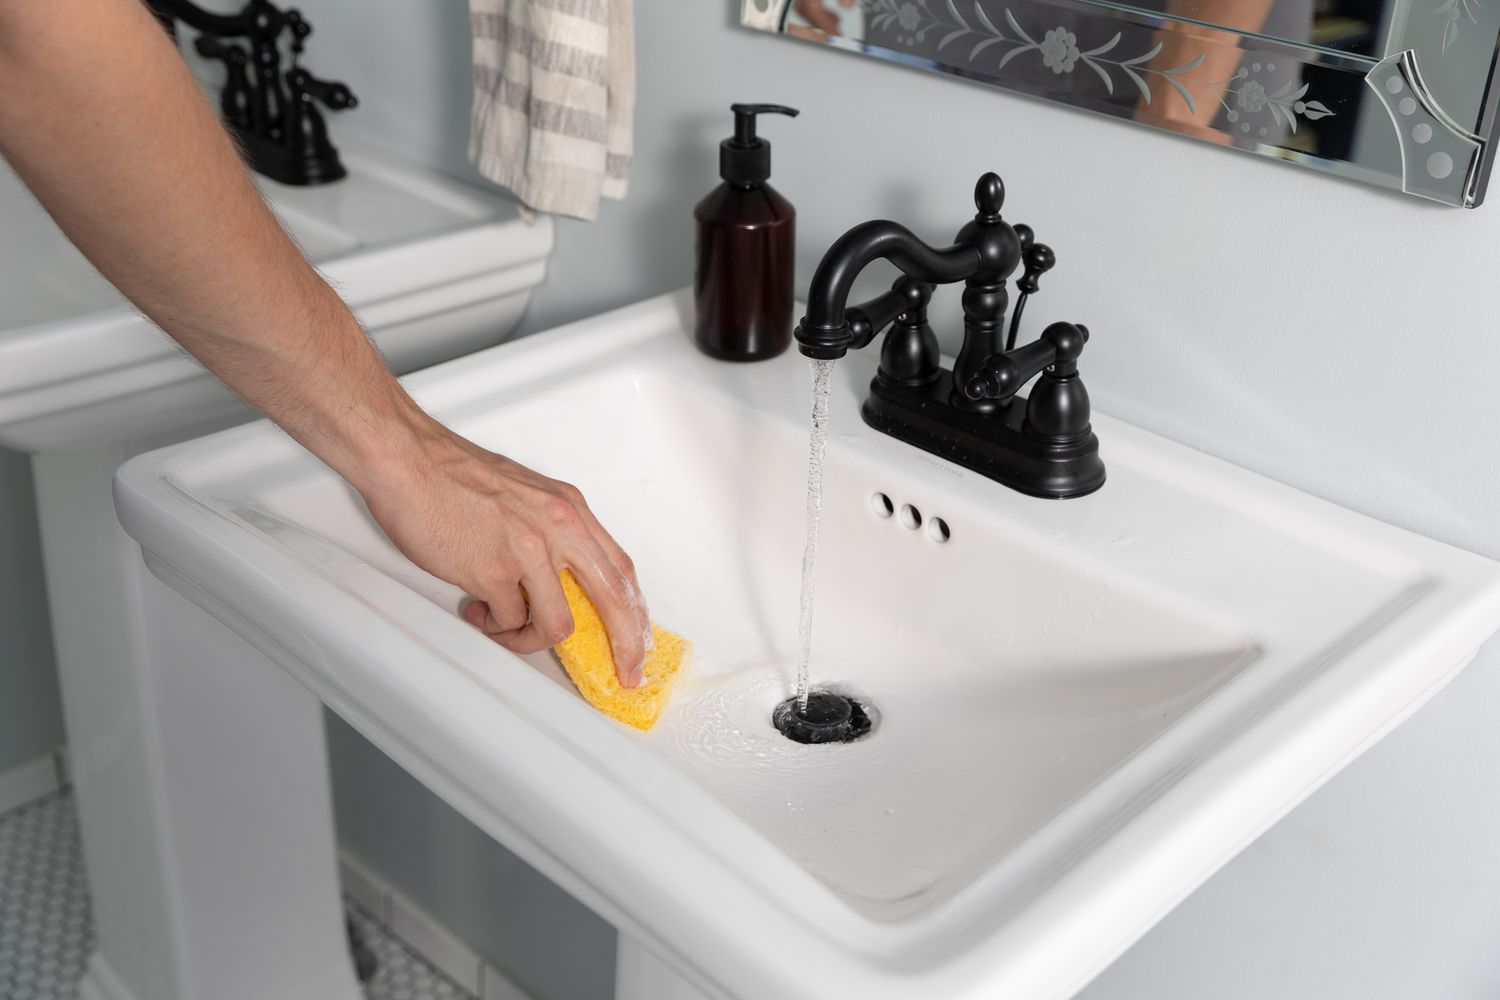 How Do You Clean A Porcelain Sink